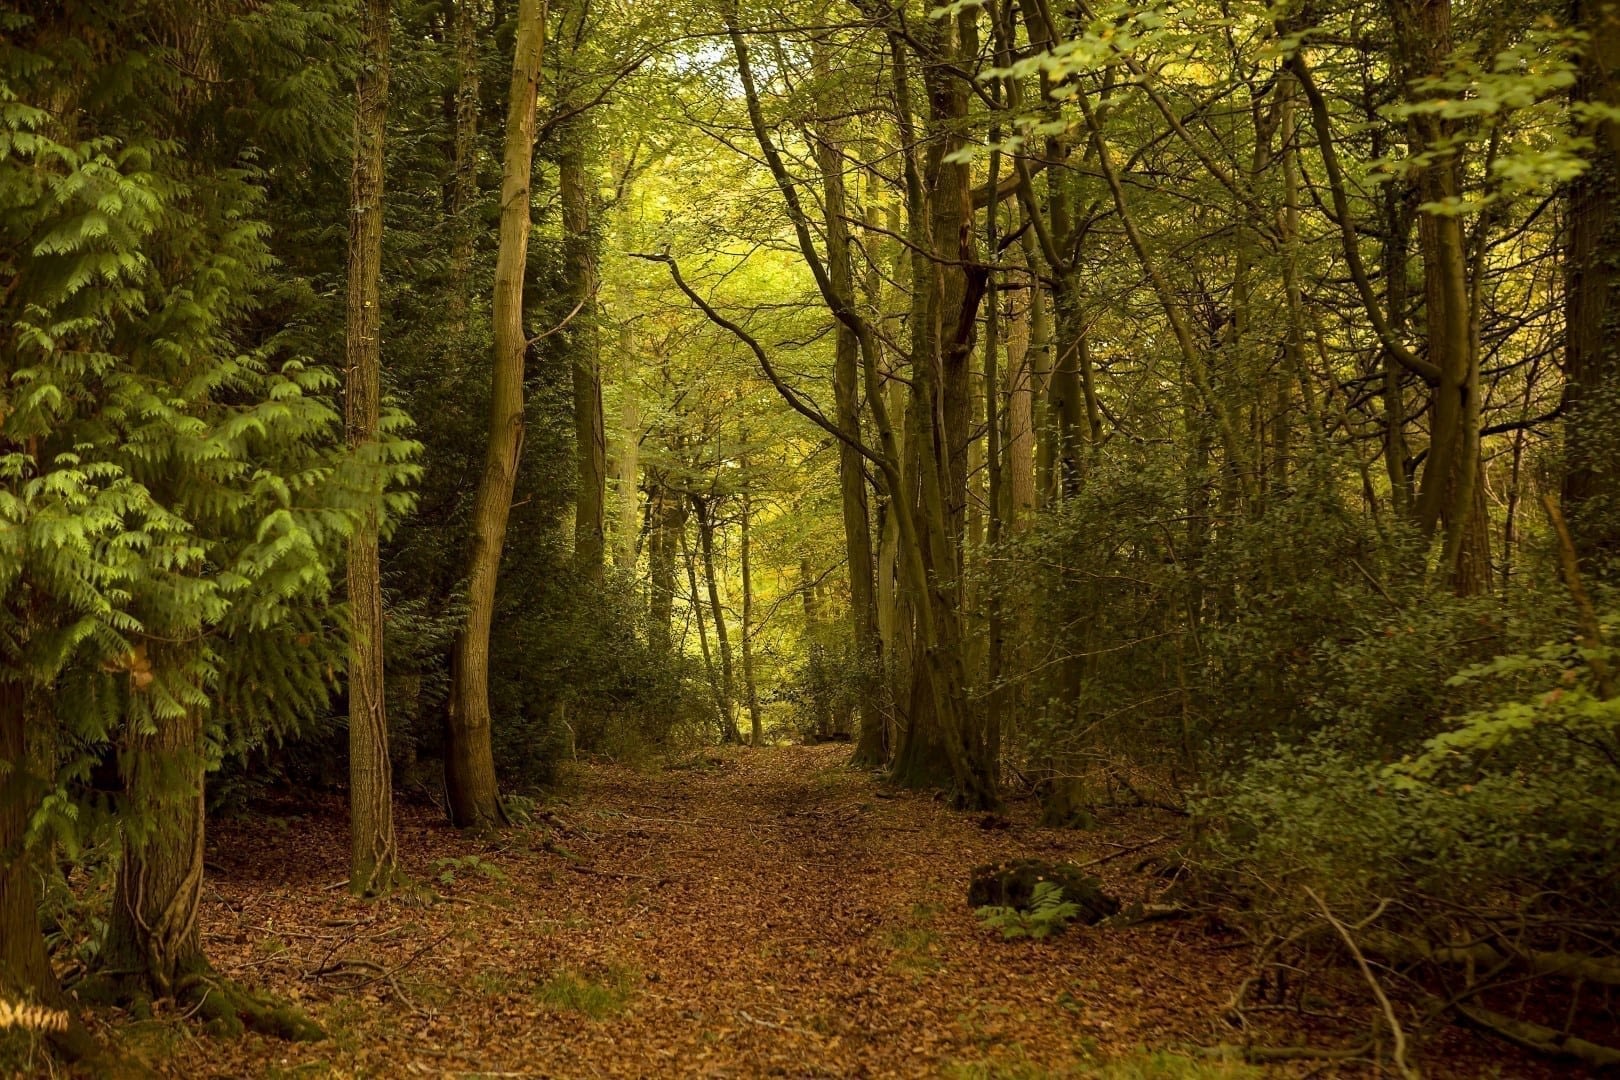 The Forest of Dean lies on the English Welsh border and is an area of outstanding beauty